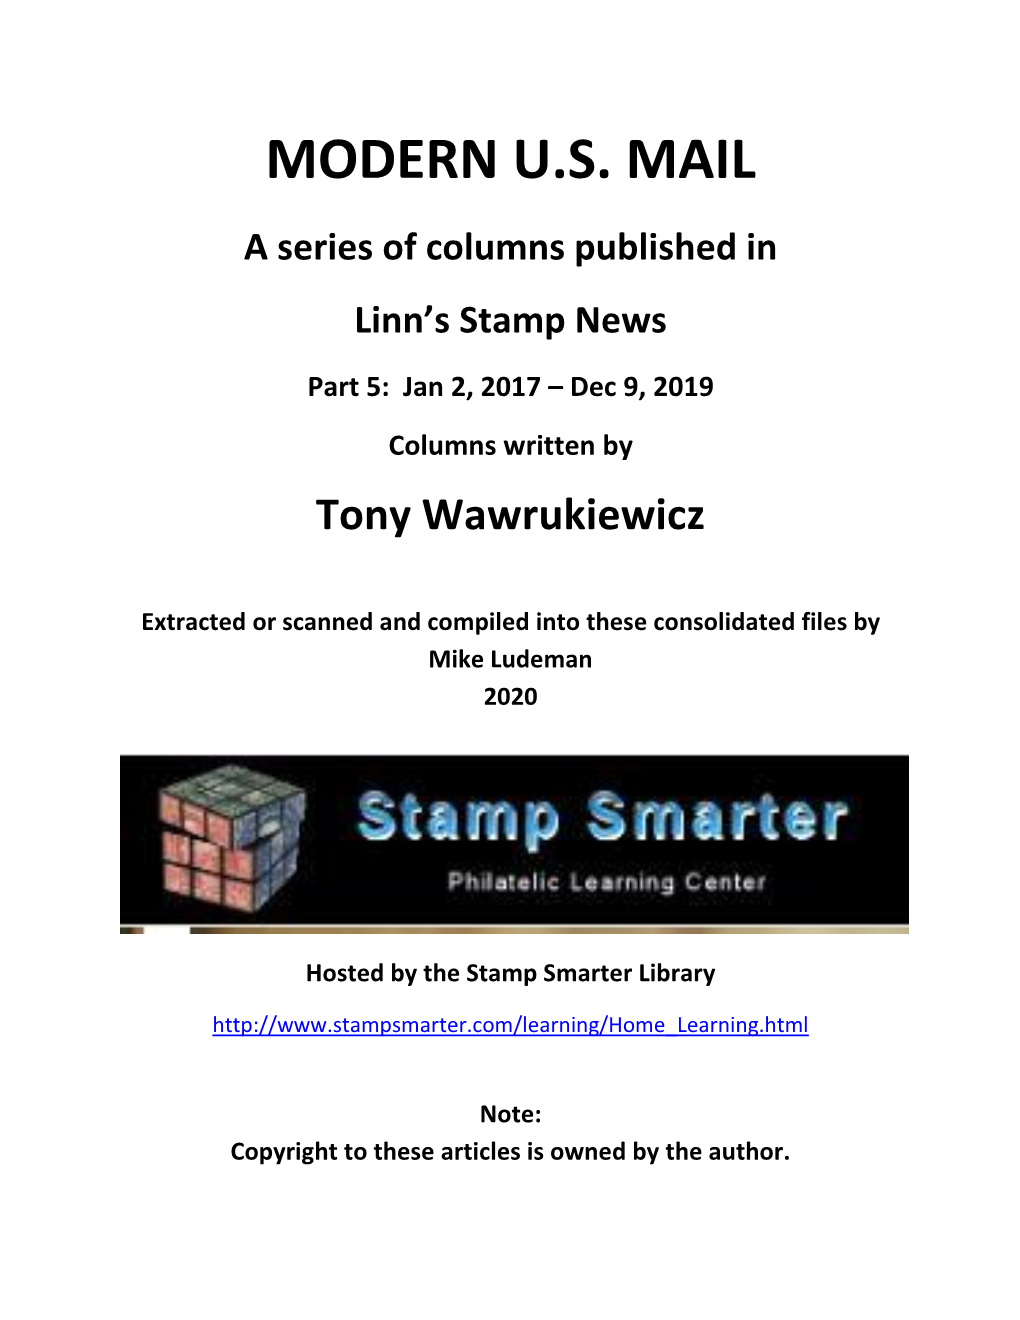 MODERN U.S. MAIL a Series of Columns Published in Linn’S Stamp News